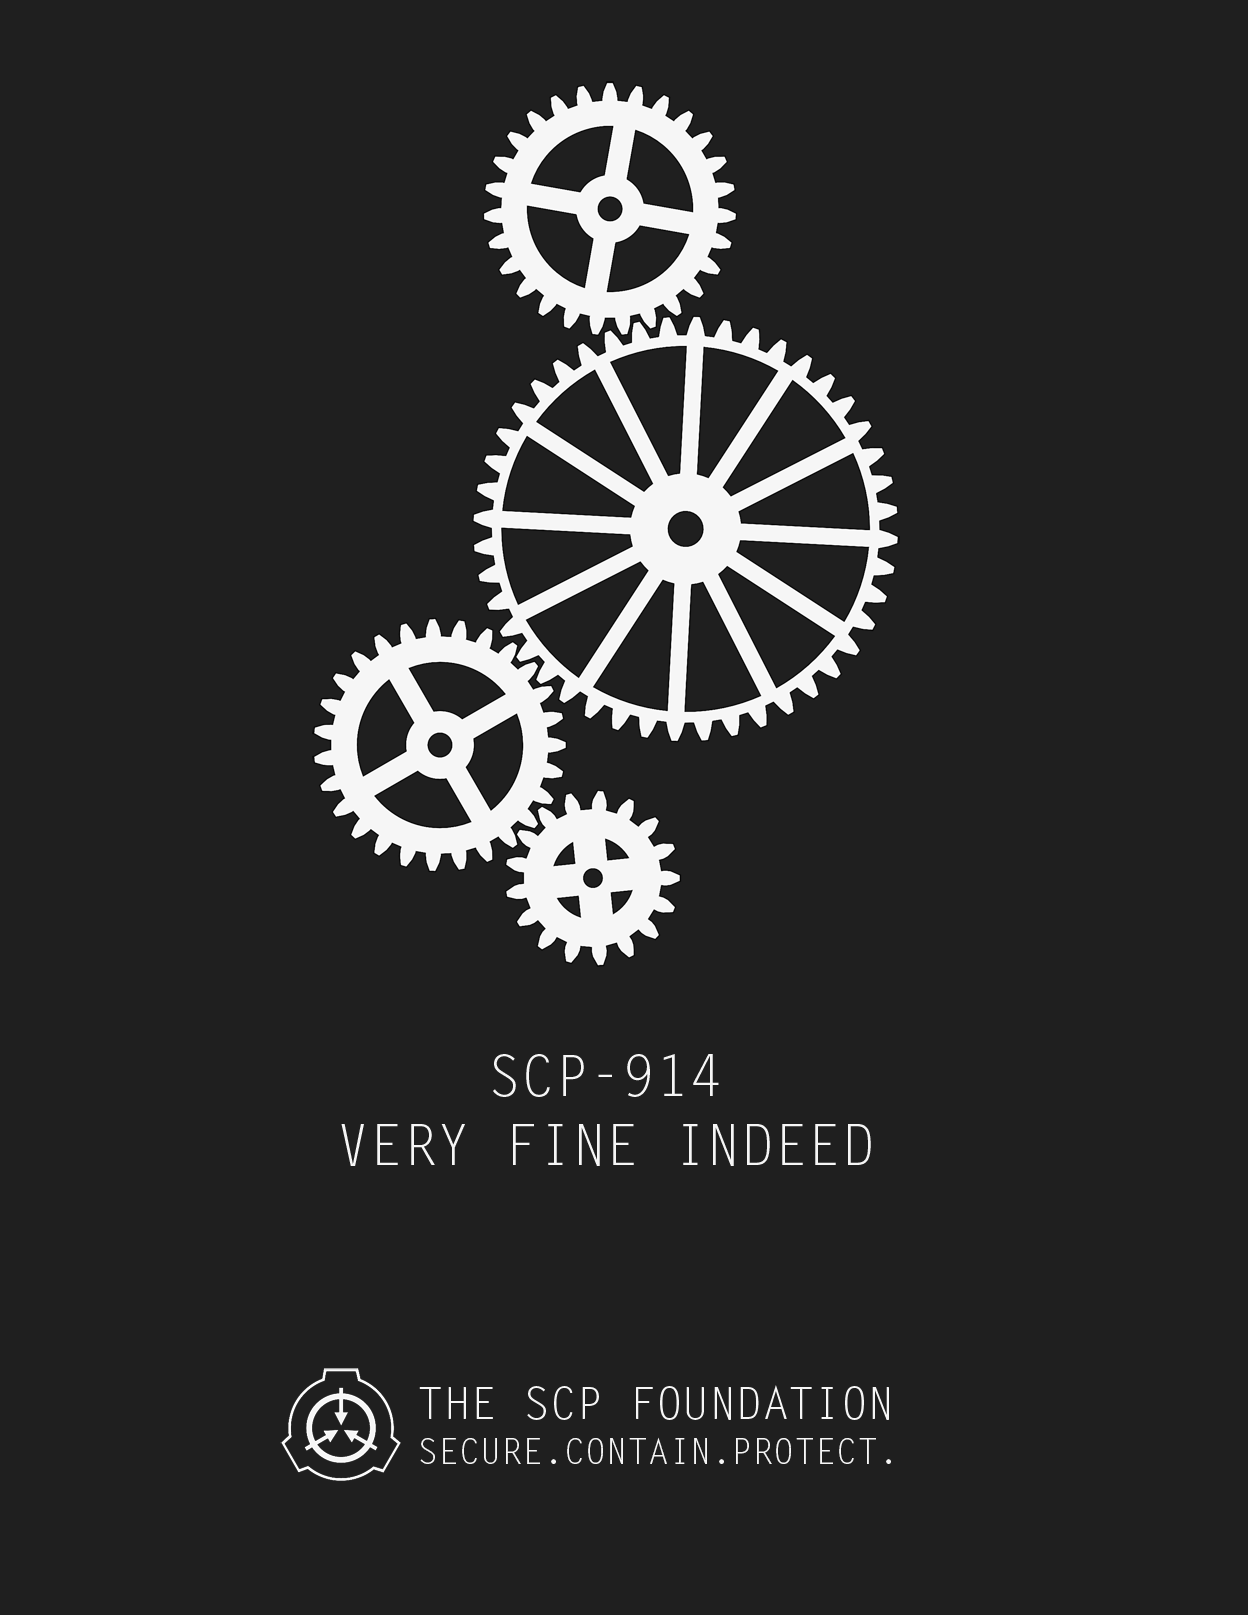 Phaeton Holland - Welcome to the SCP Foundation Wallpaper